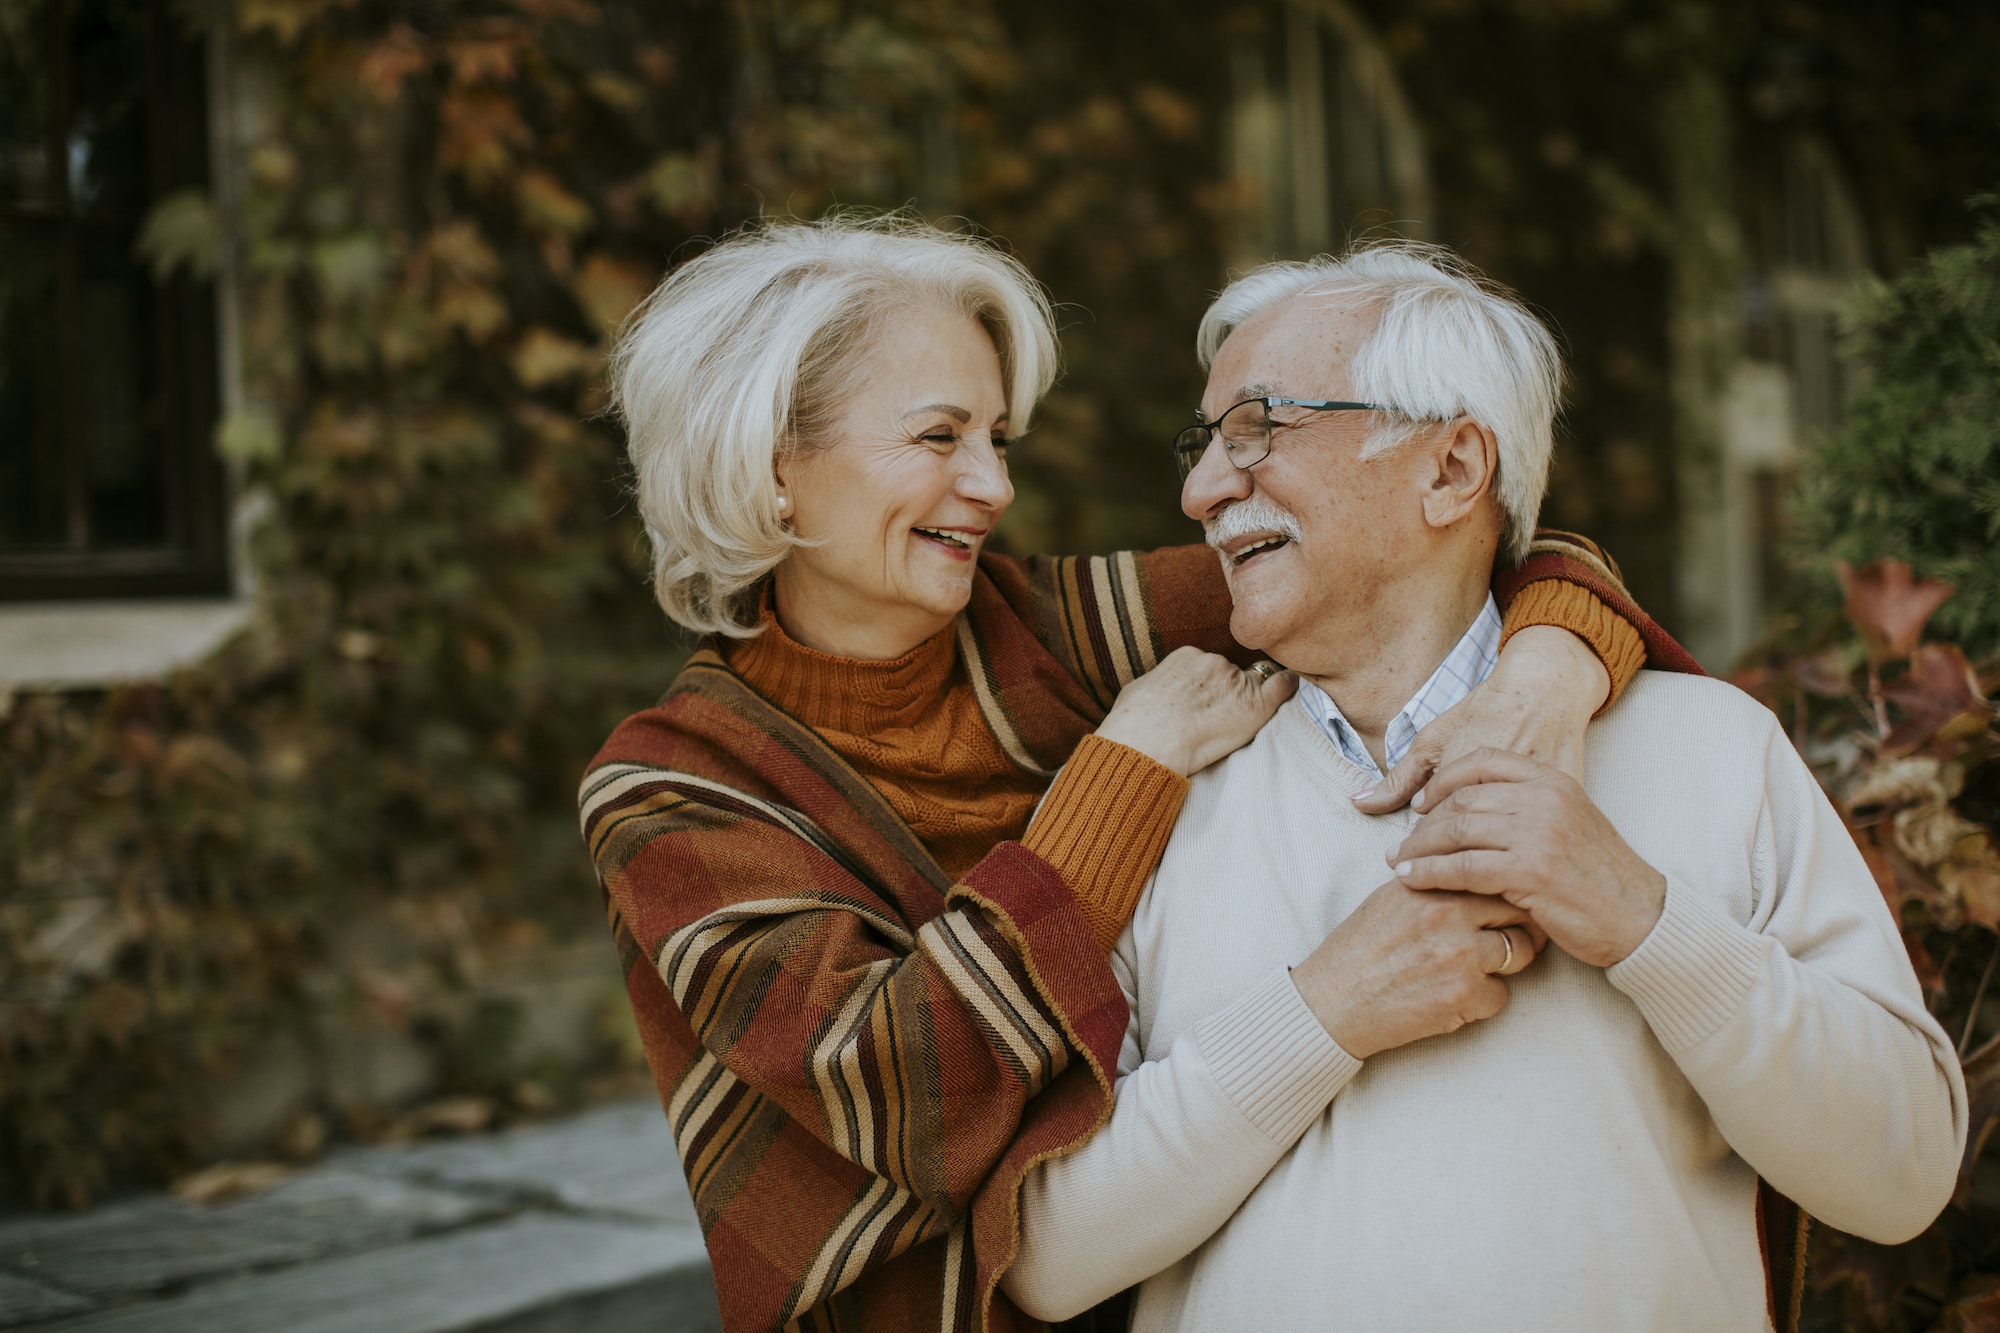 Senior couple embracing in a park during autumn